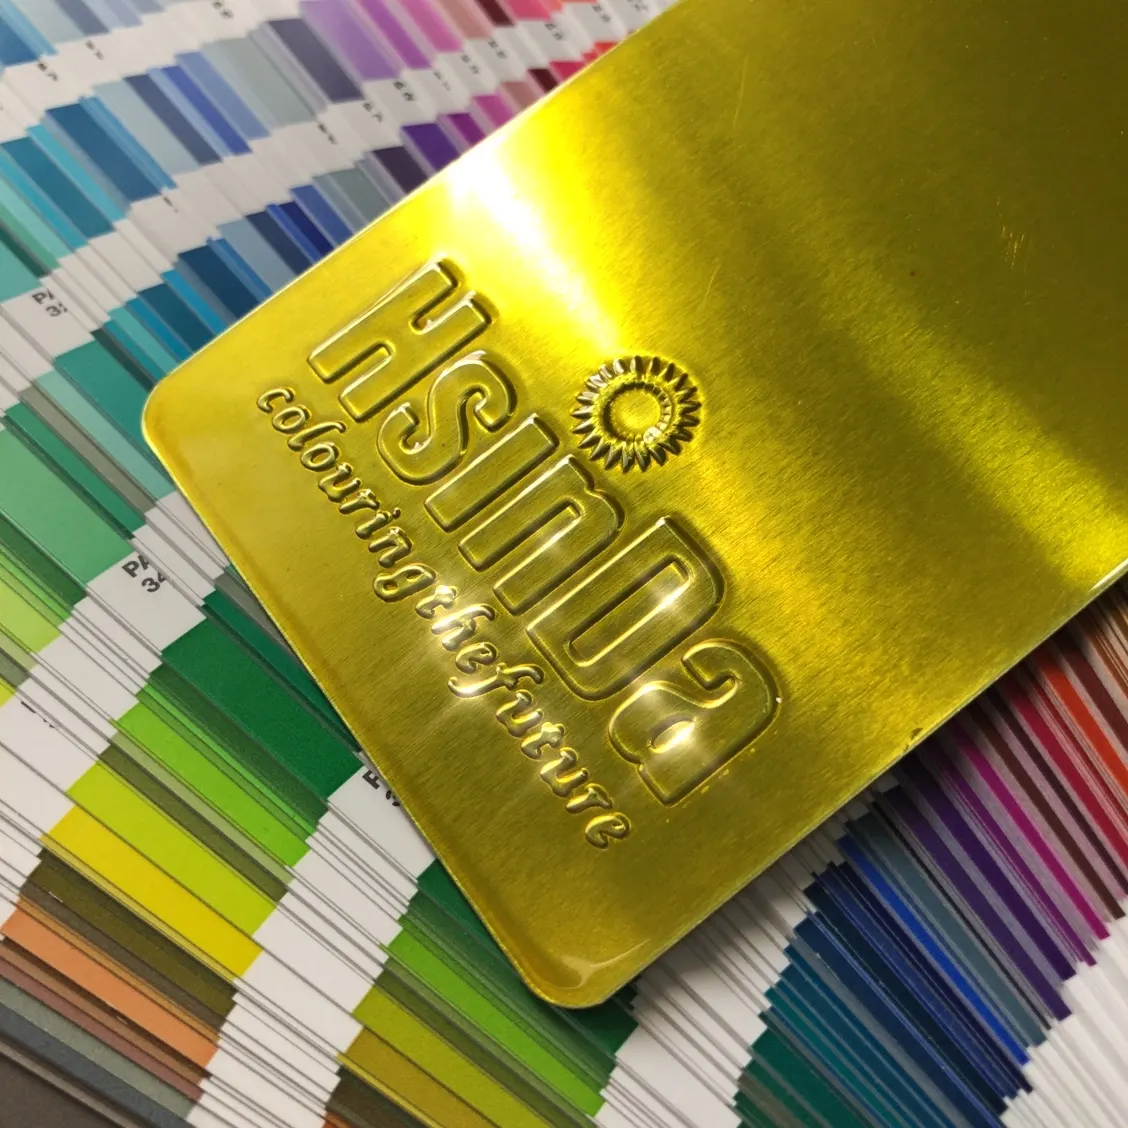 Color powder paints illusion candy rare gold plating chrome effect solid powder coating paint for luxury furniture